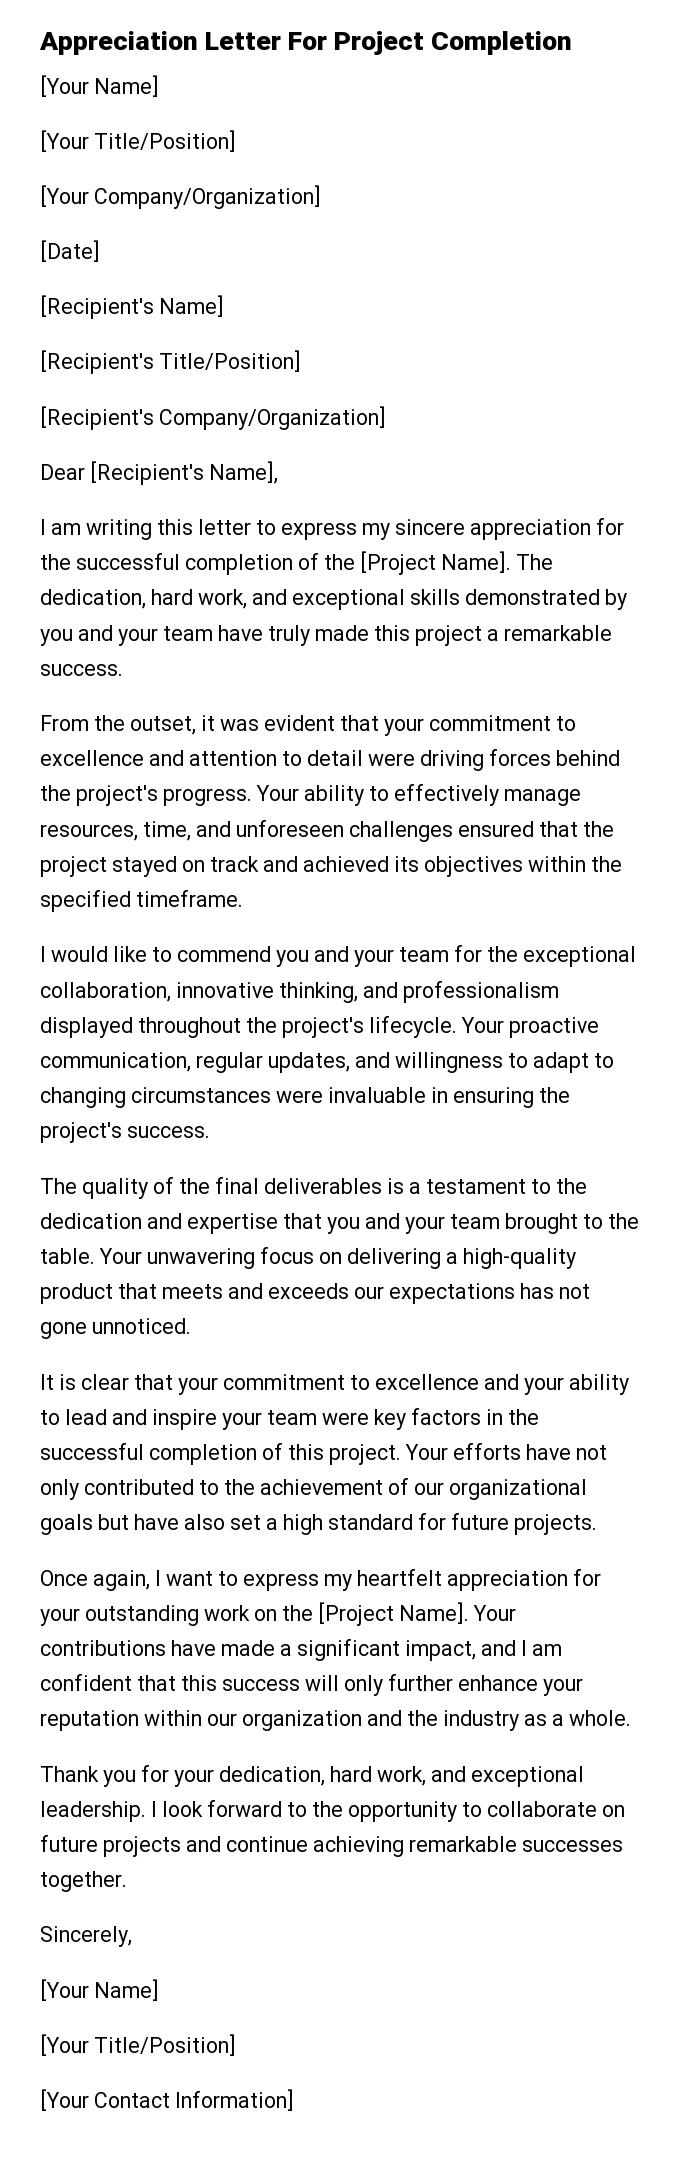 Appreciation Letter For Project Completion